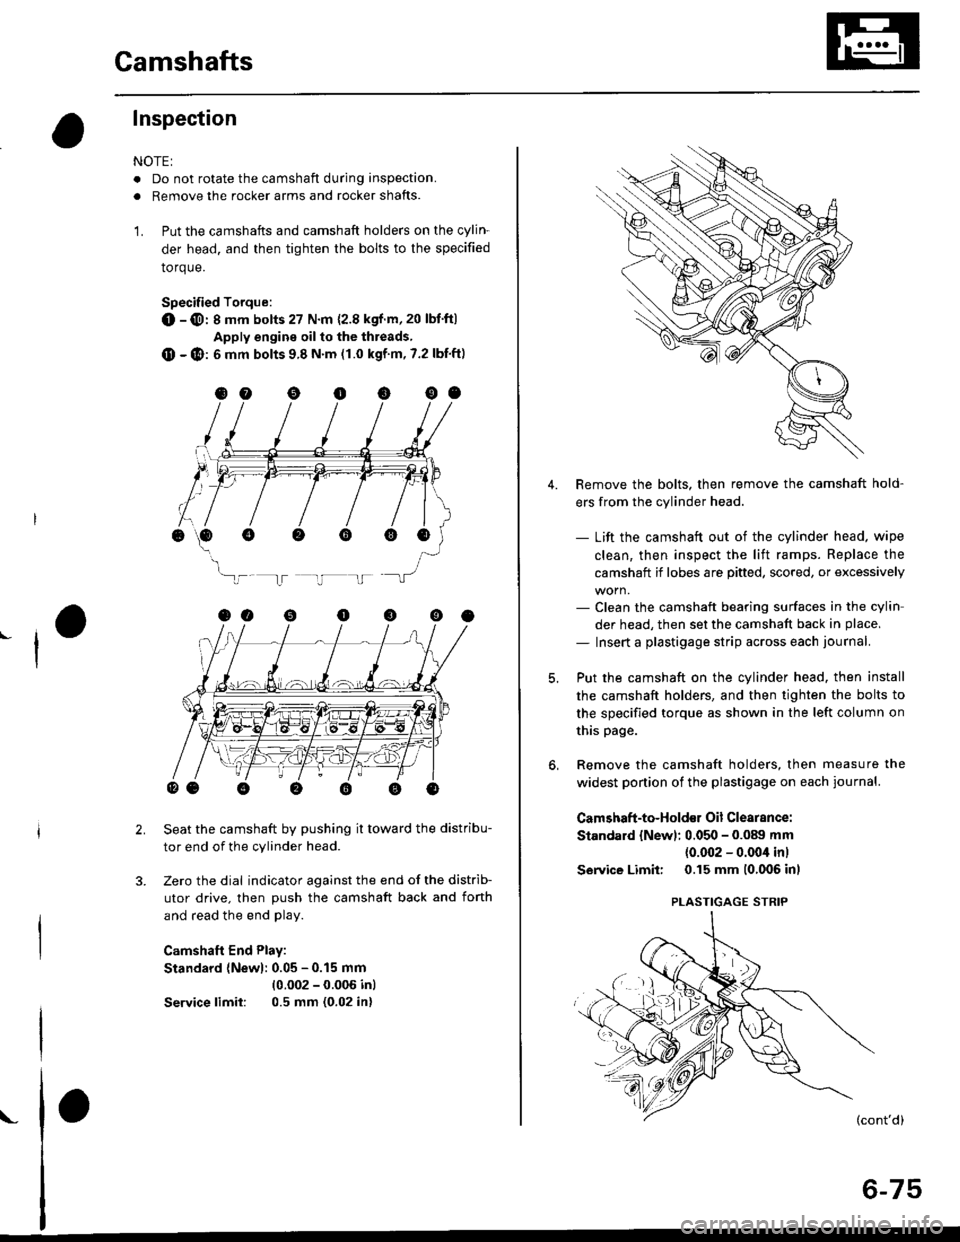 HONDA CIVIC 1999 6.G Workshop Manual Camshafts
Inspection
NOTE:
. Do not rotate the camshaft during inspection.
. Removg the rocker arms and rocker shafts.
L Put the camshafts and camshaft holders on the cylin-
der head. and then tighte